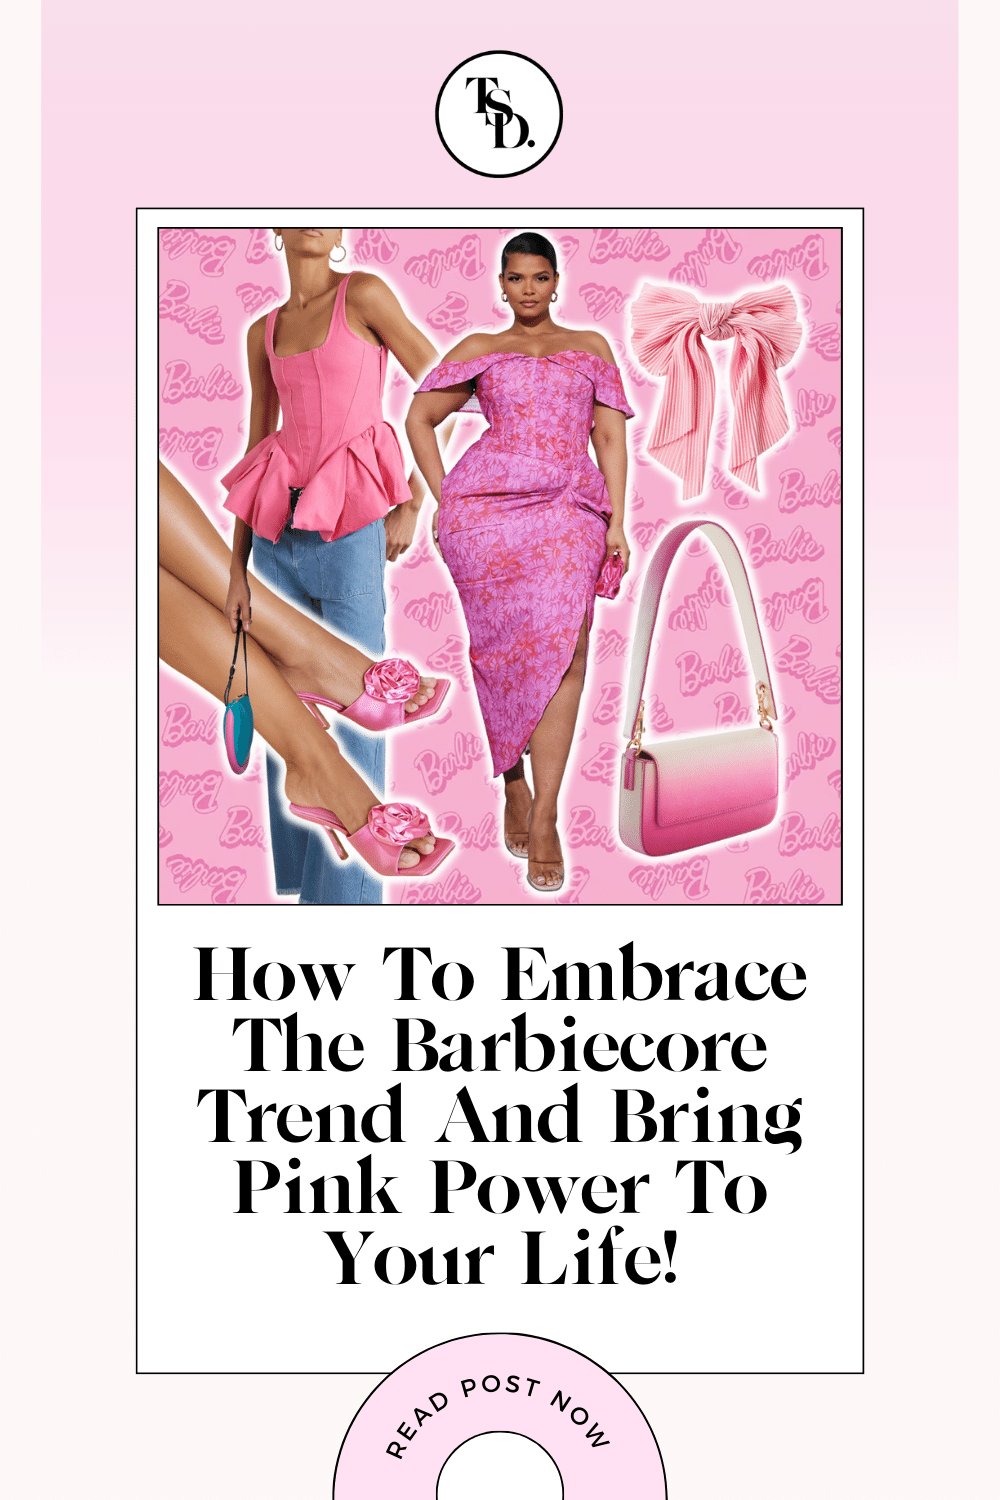 Illustration Barbiecore Aesthetic Trend. Pin for Pinterest.png